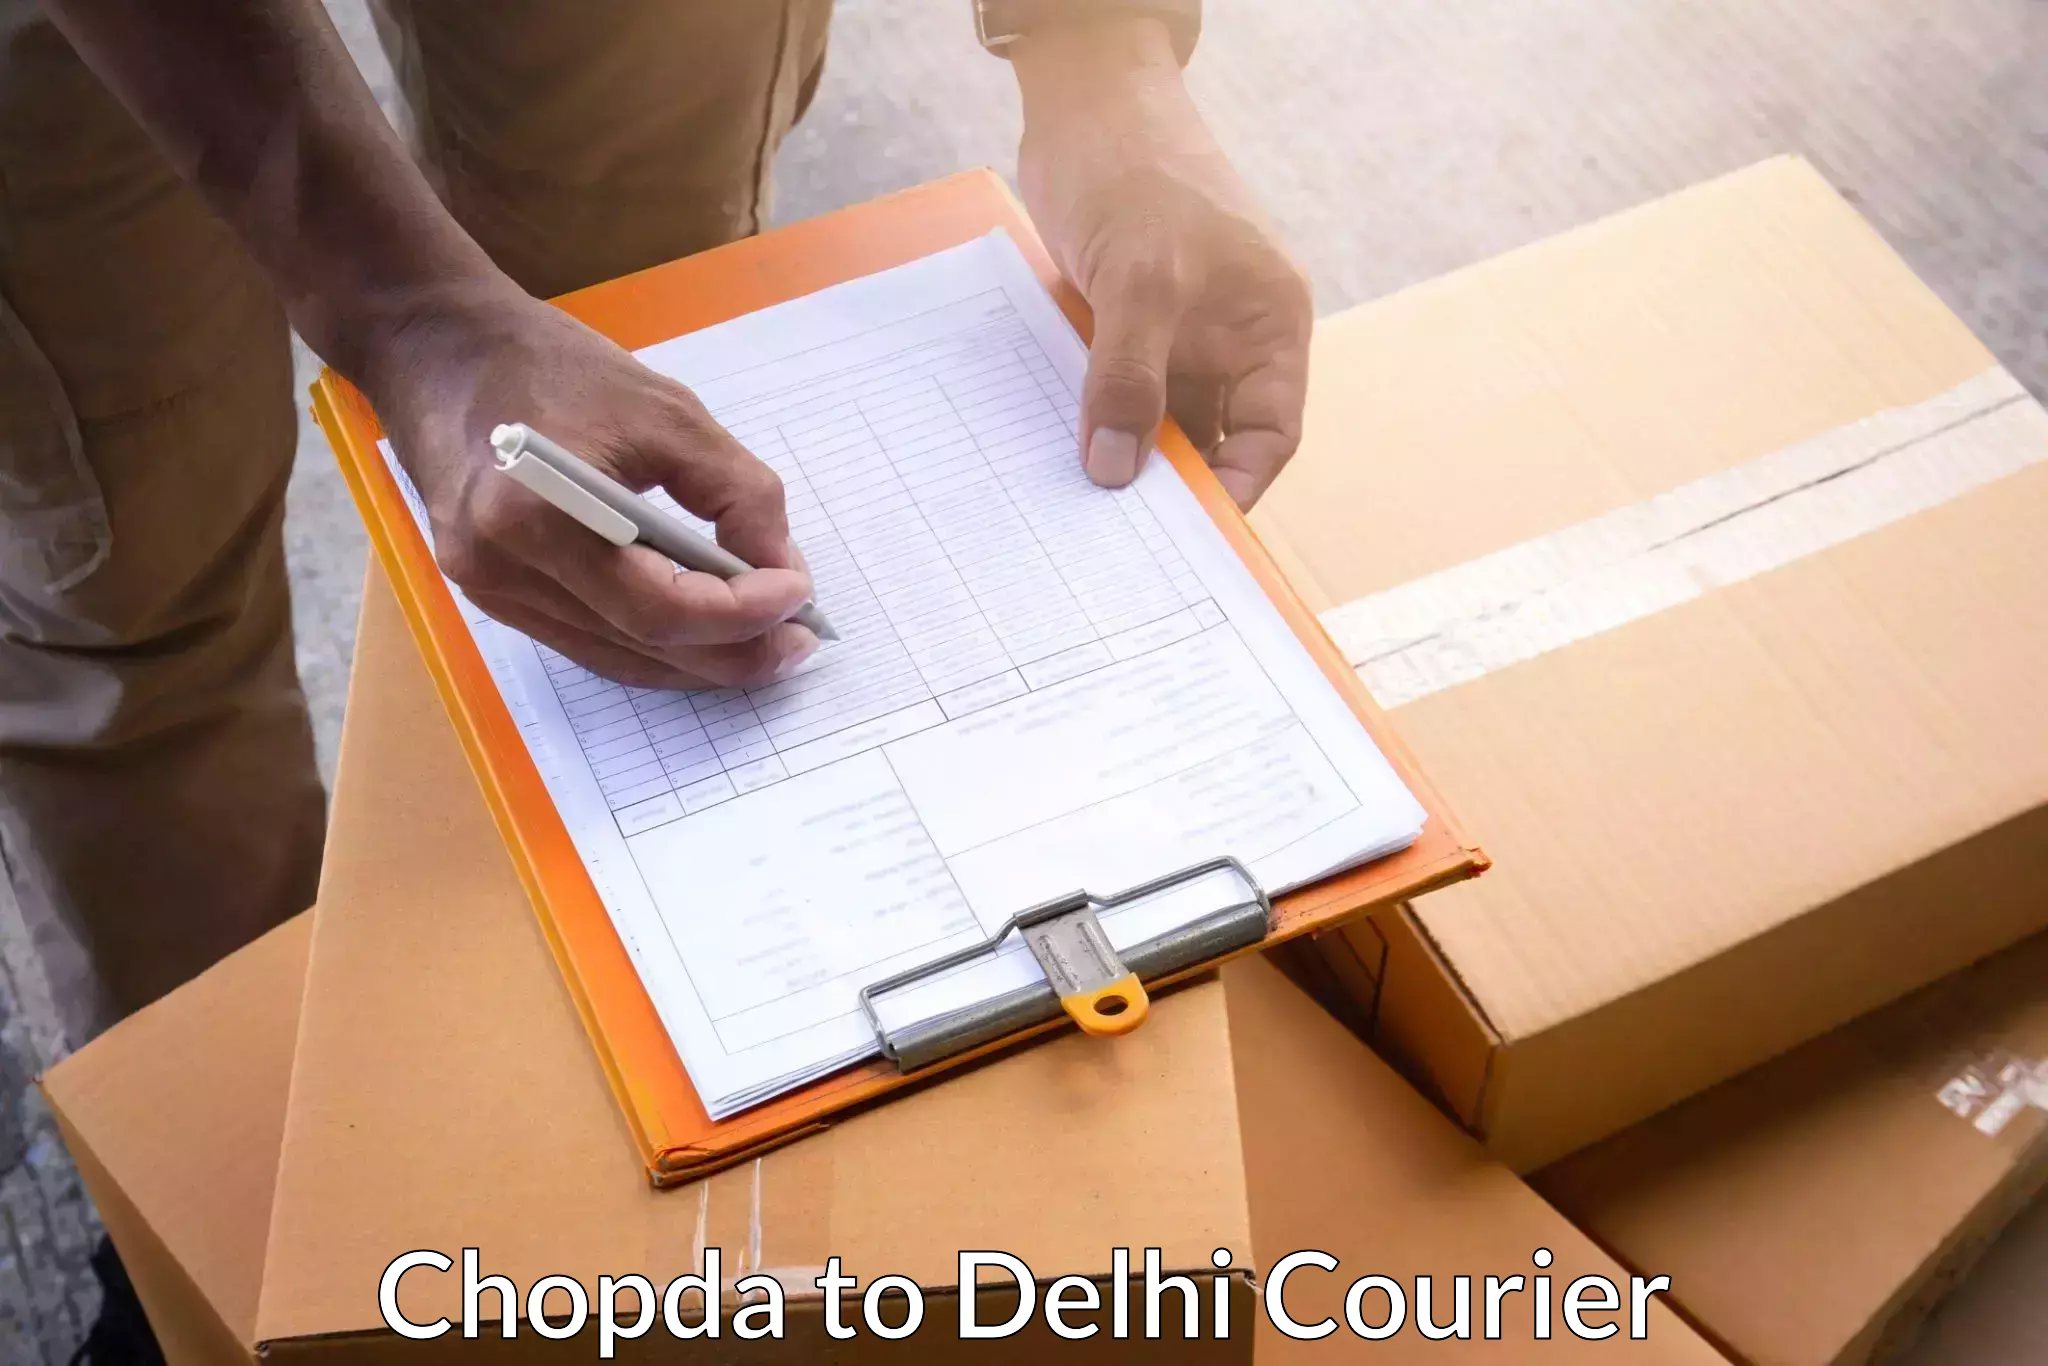 Next-day delivery options Chopda to Delhi